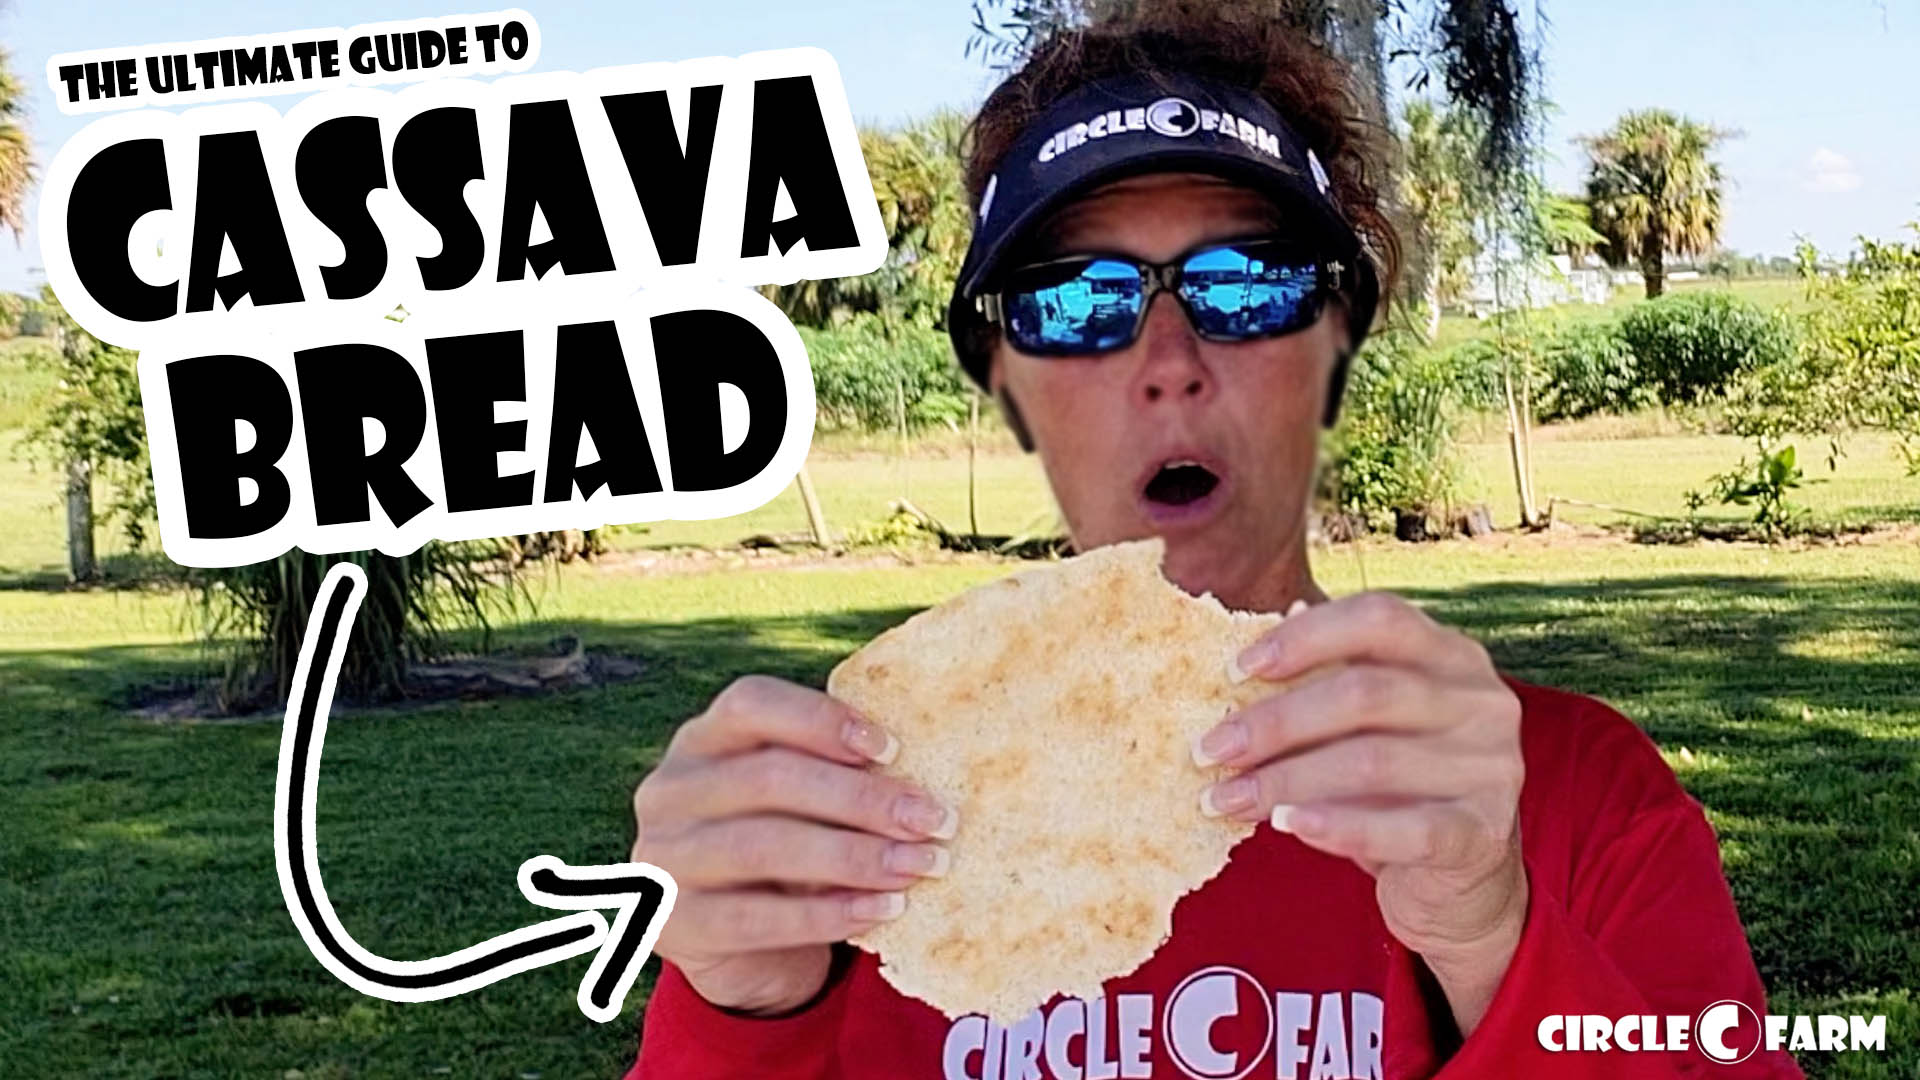 The Ultimate Guide to Cassava Bread from Circle C Farm